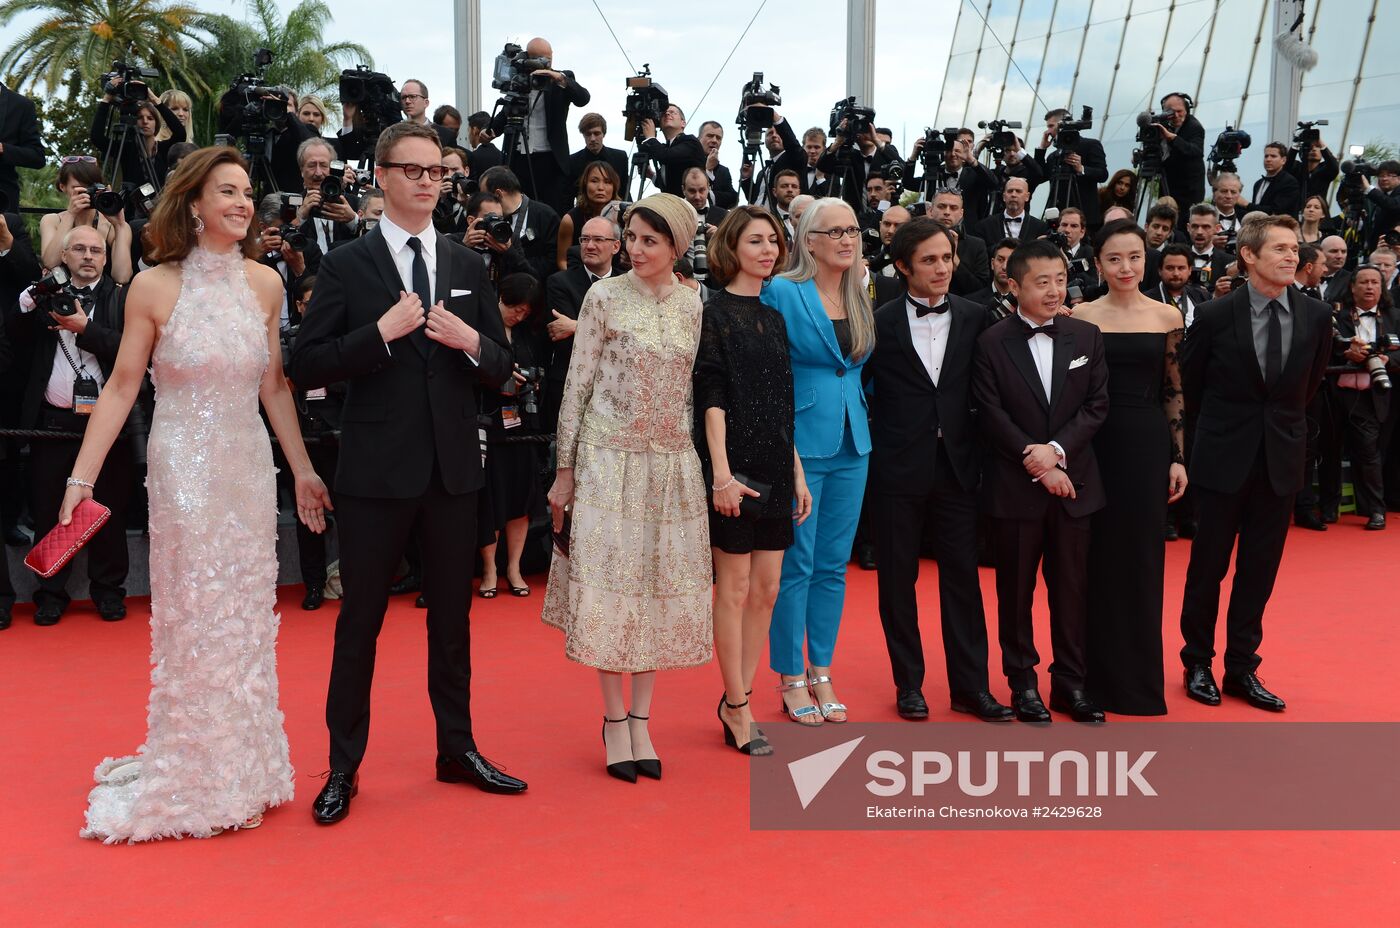 Opening ceremony of 67 Cannes Festival